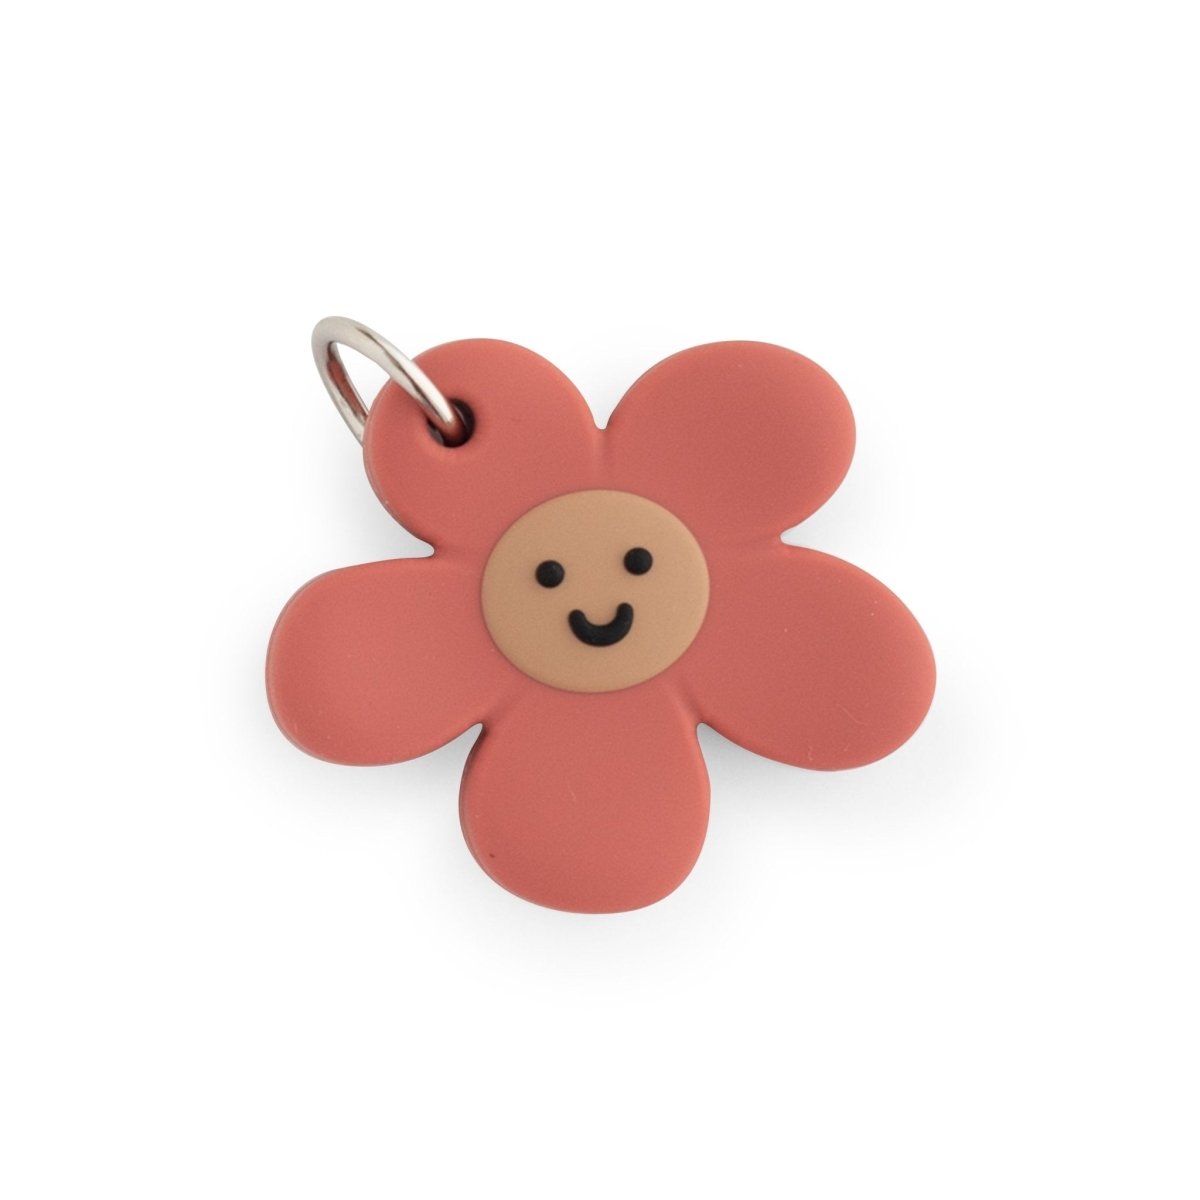 Silicone Charms Flowers Burgundy Rose from Cara & Co Craft Supply